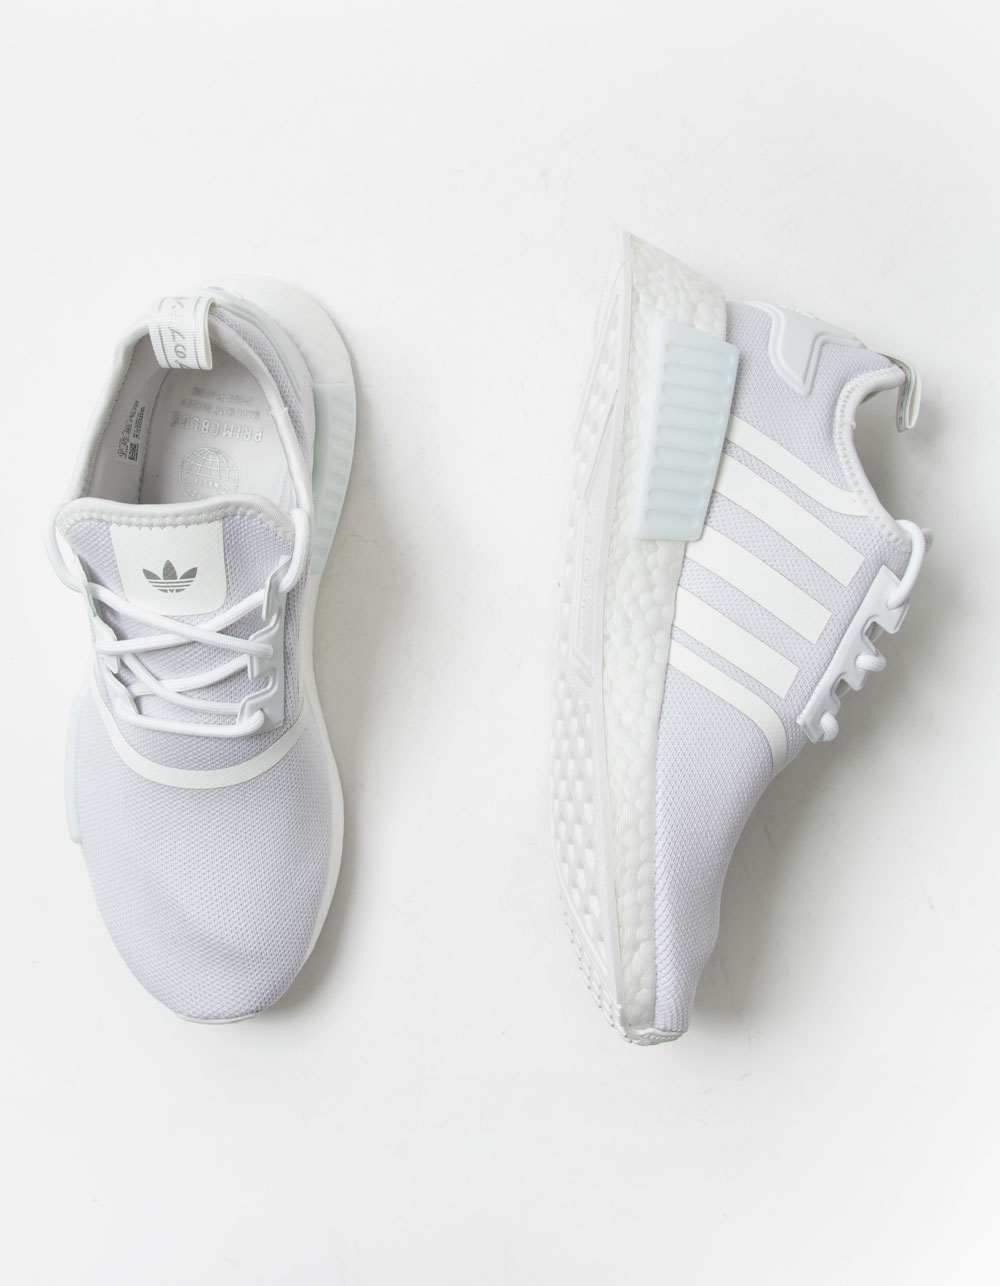 Visum New Zealand have ADIDAS NMD R1 Womens Shoes - WHITE | Tillys